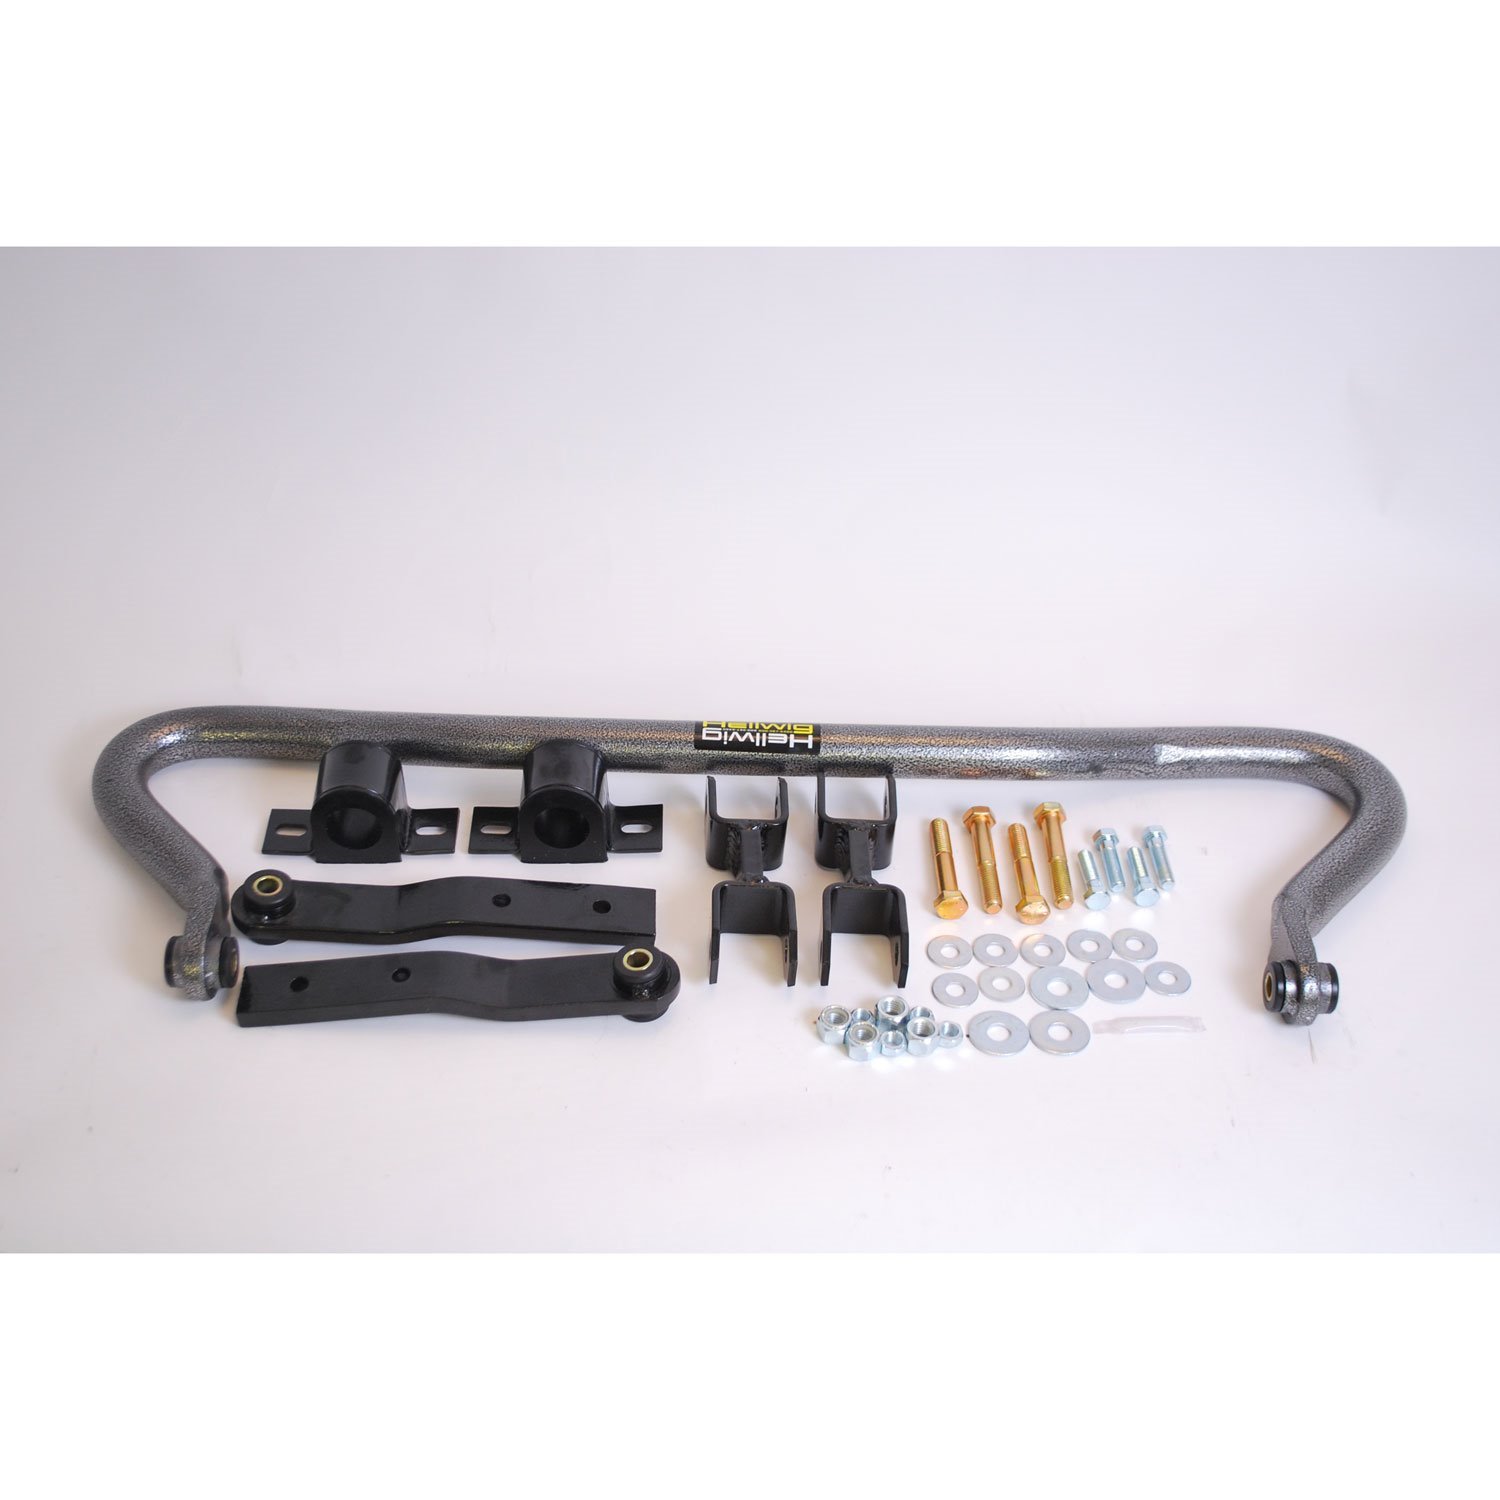 Front Sway Bar for 1999-2014 Ford F53/Motorhome Chassis